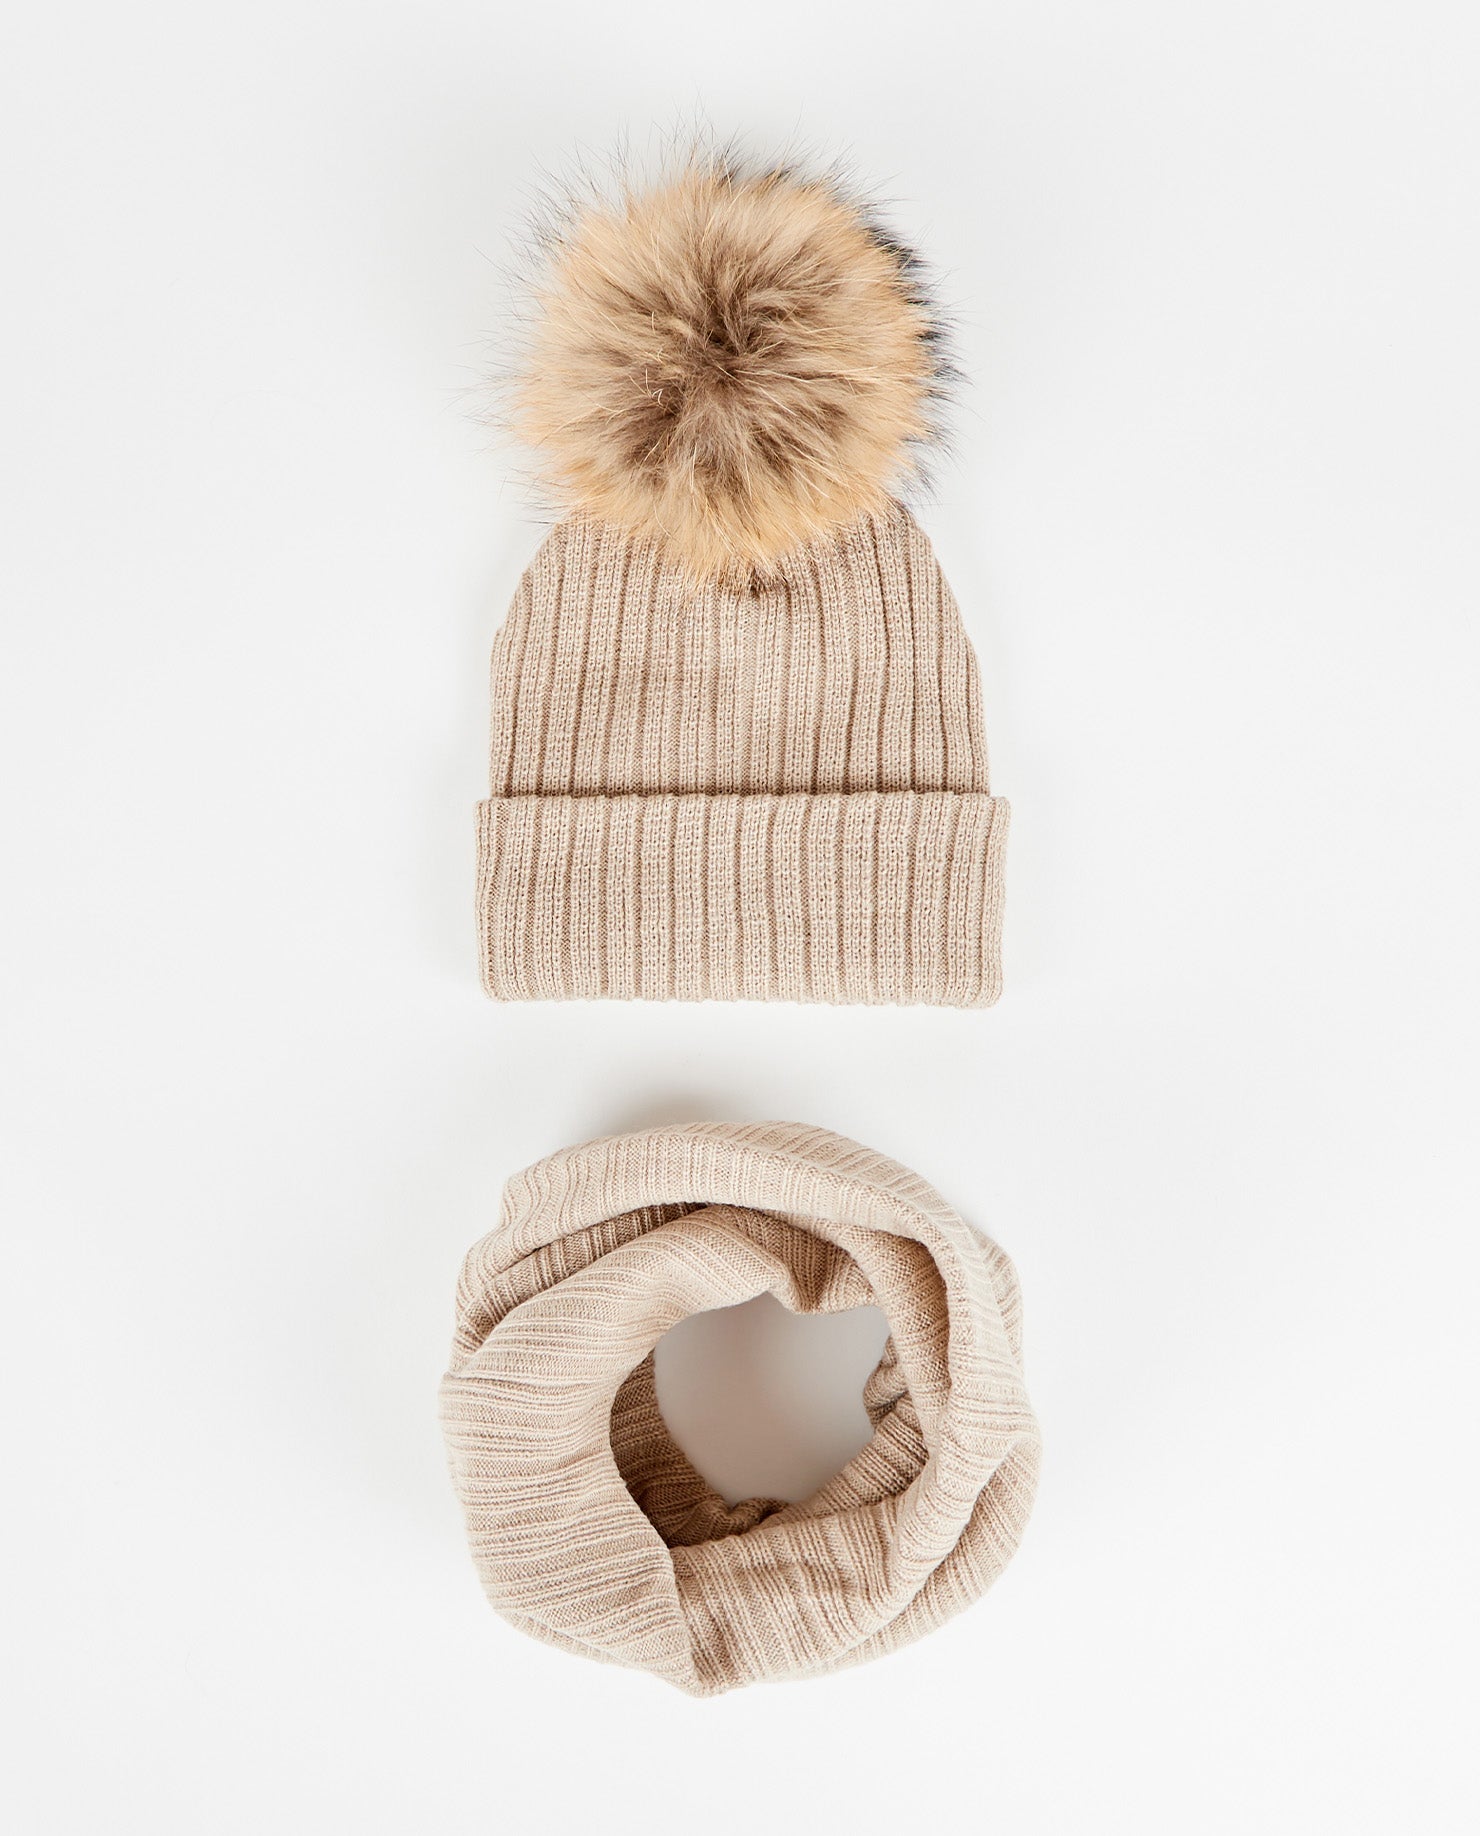 DUO Tuque Adulte et Foulard Doublé | Adult Knit Beanie and Scarf - Mpompon